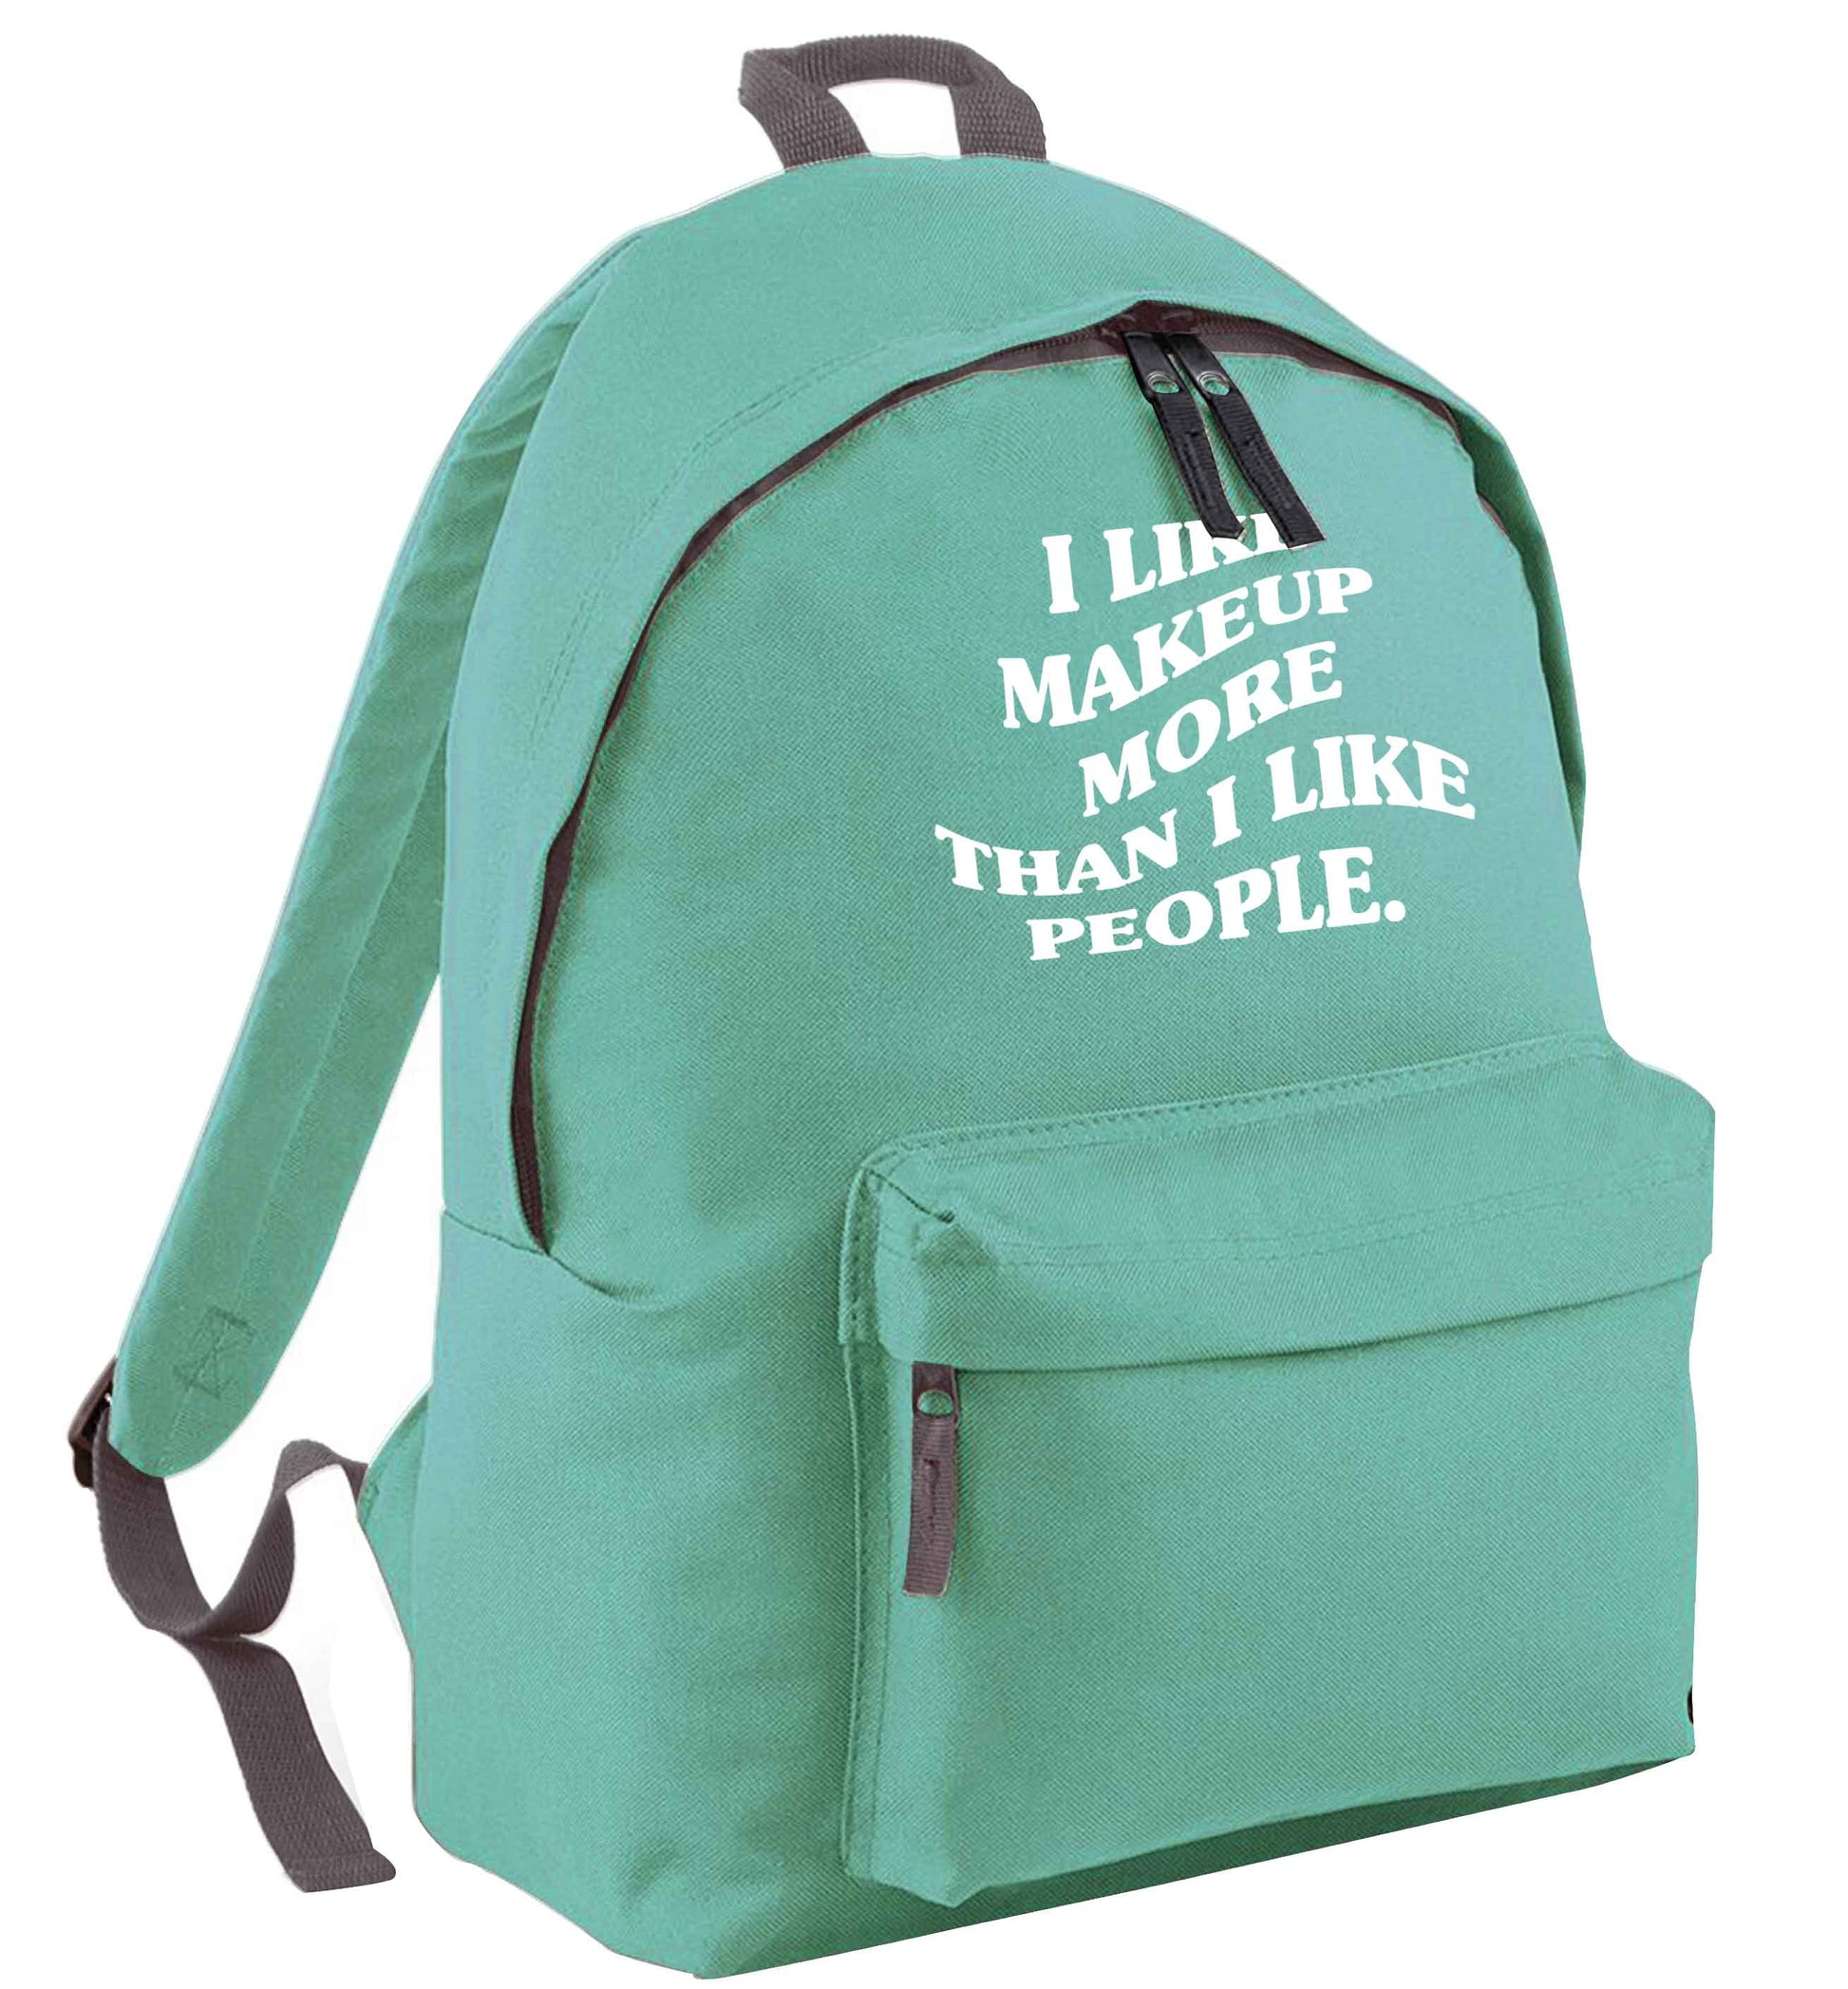 I like makeup more than people mint adults backpack